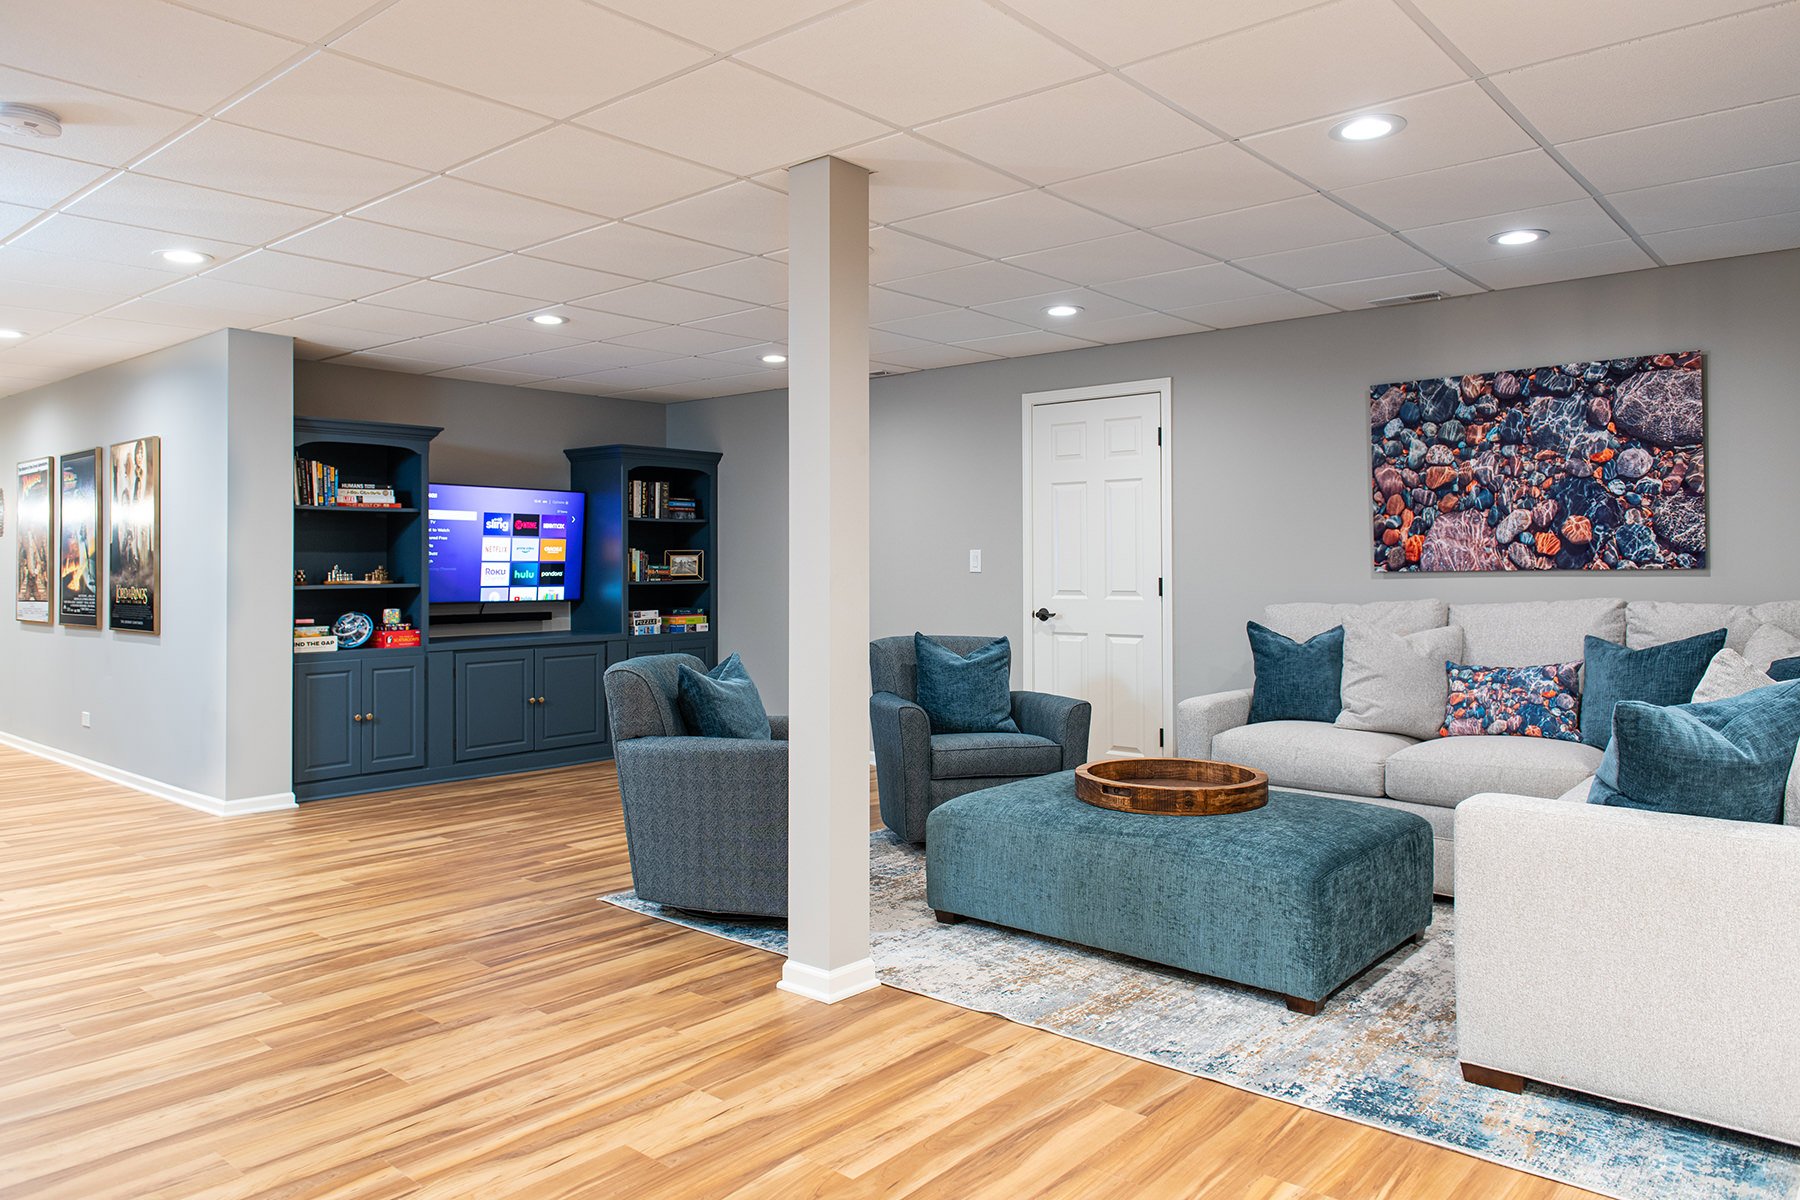 Basement with hardwood floors, light gray walls and navy built-in cabinetry